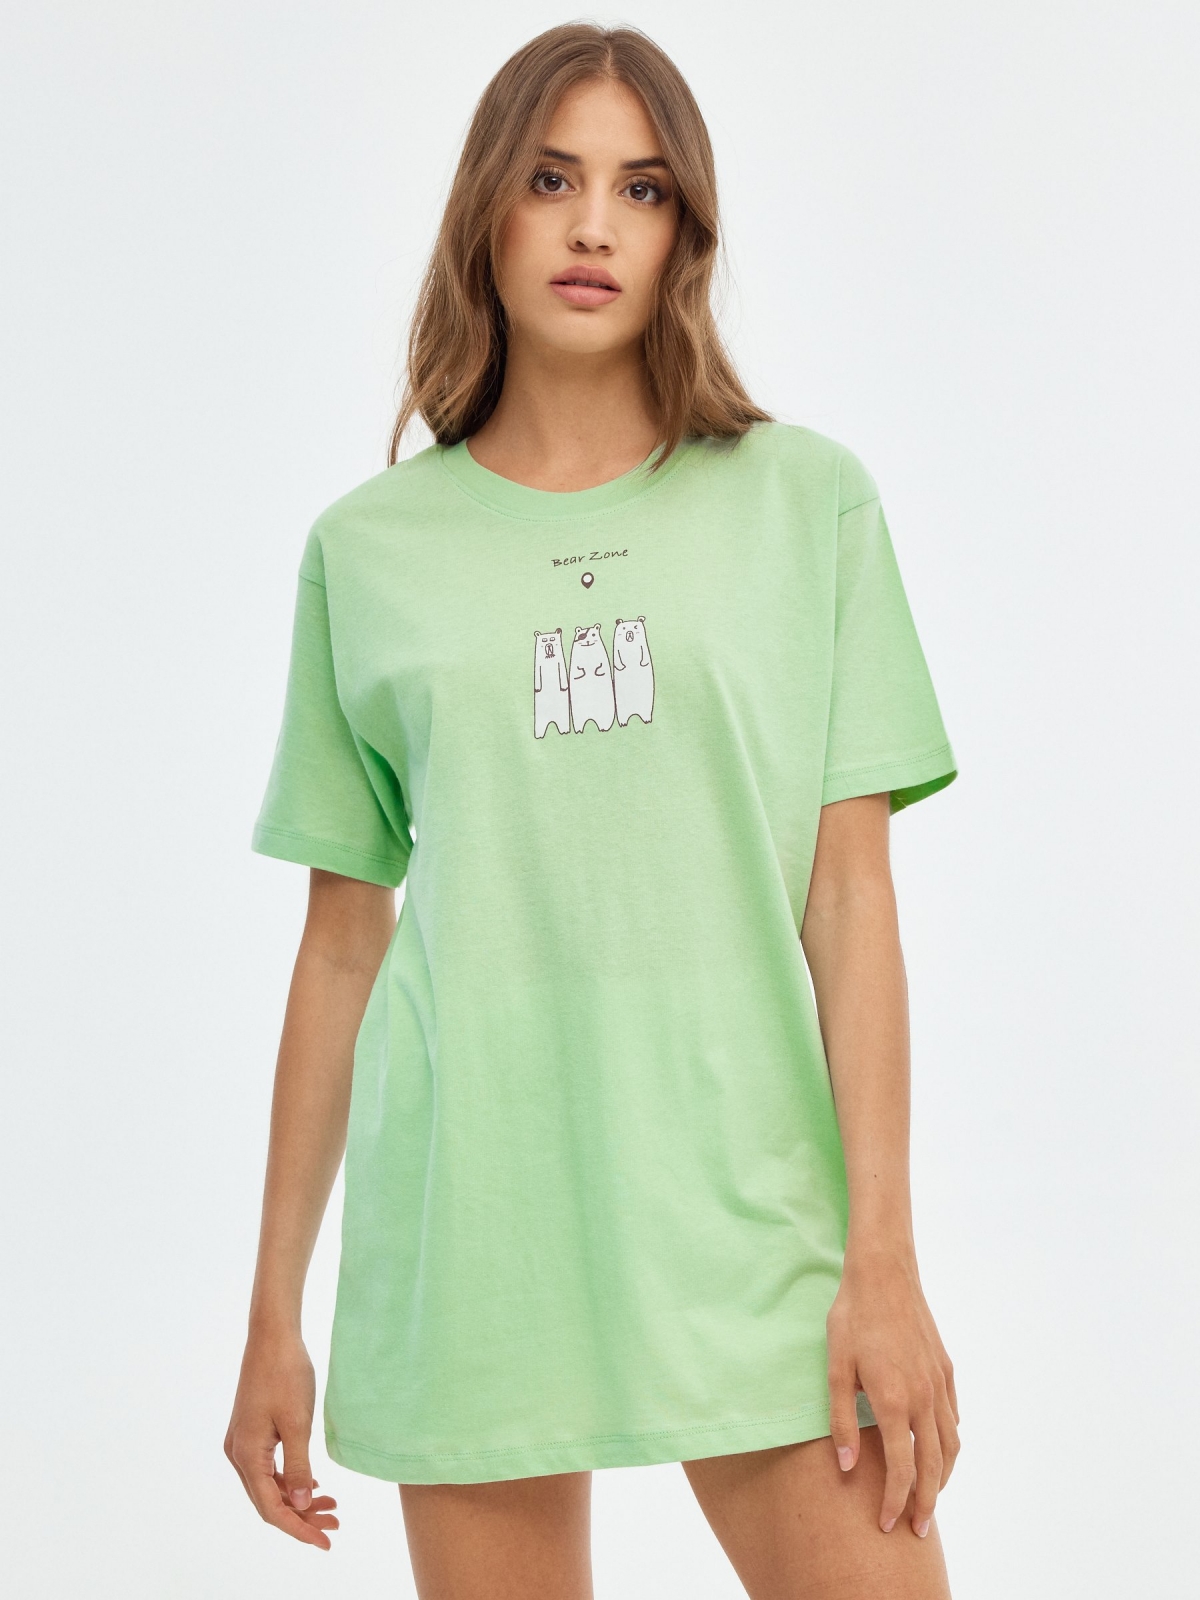 Oversized T-shirt In Forest light green middle front view